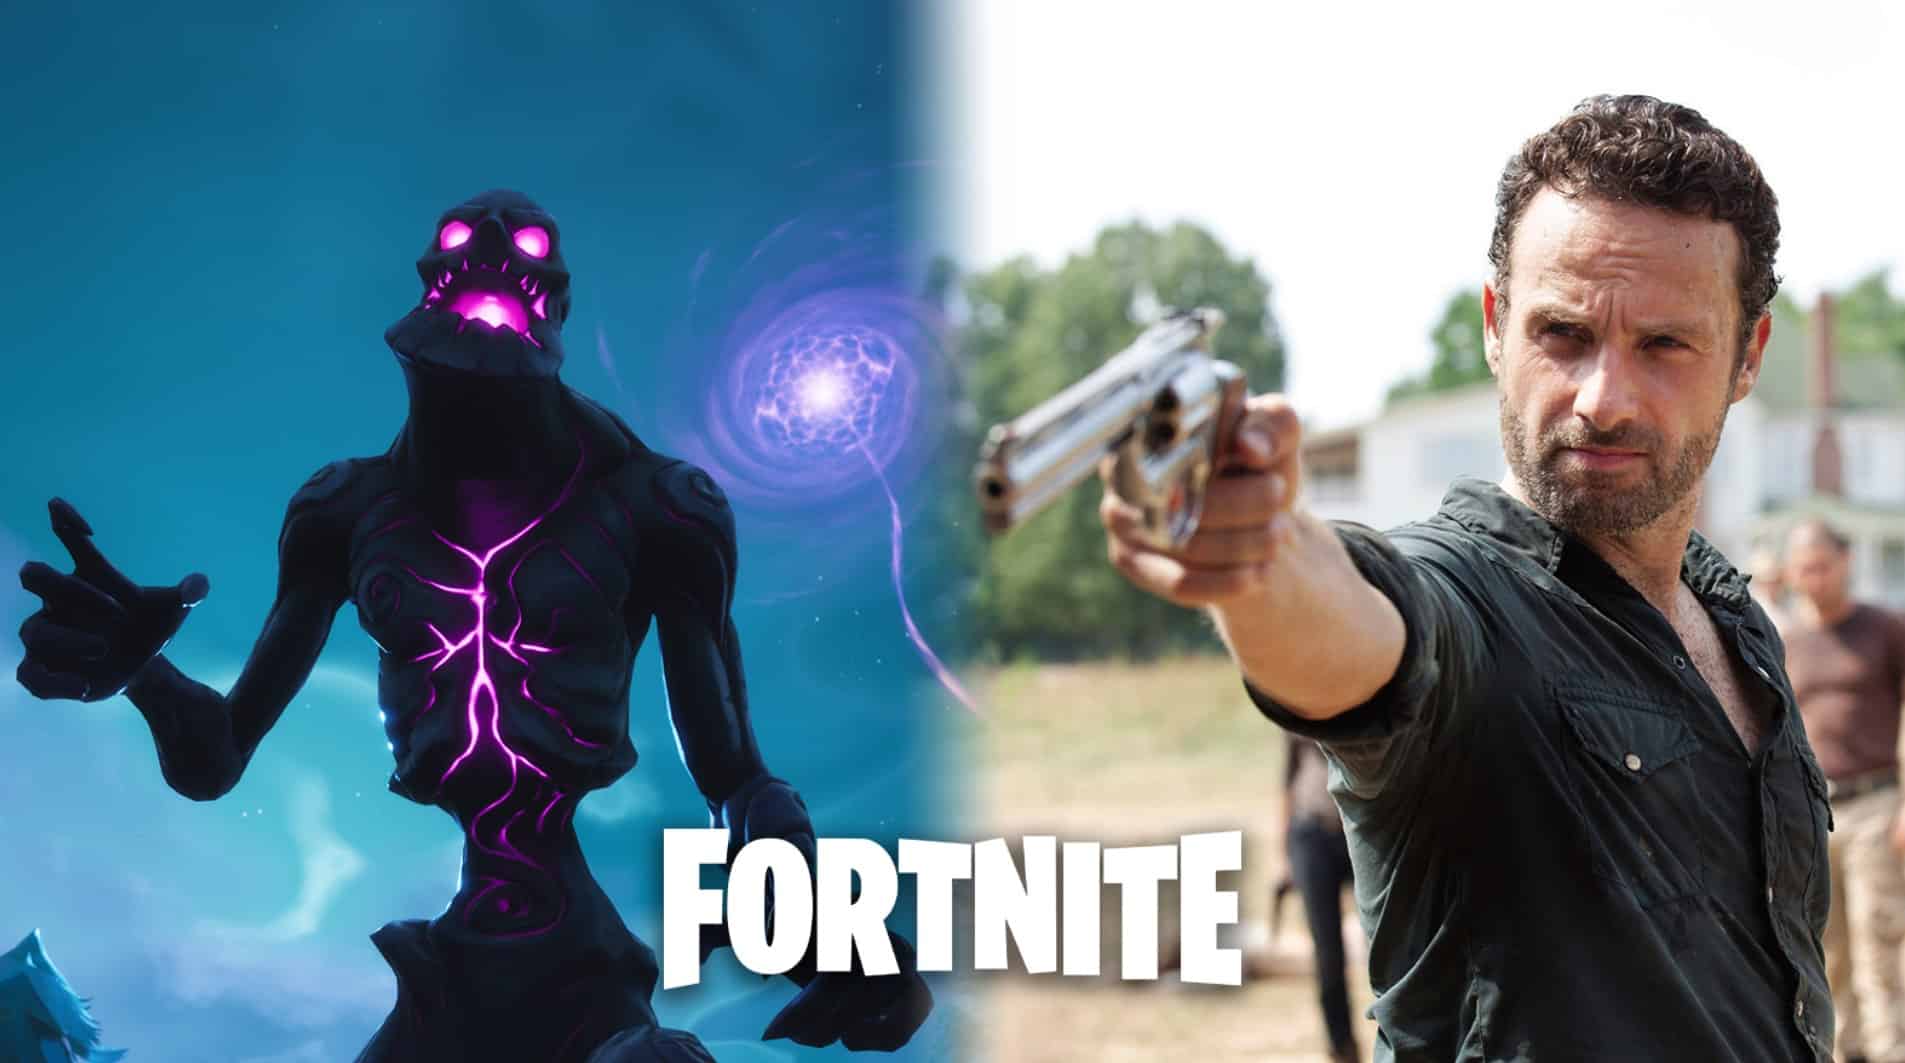 Fortnite gameplay next to Rick Grimes of The Walking Dead